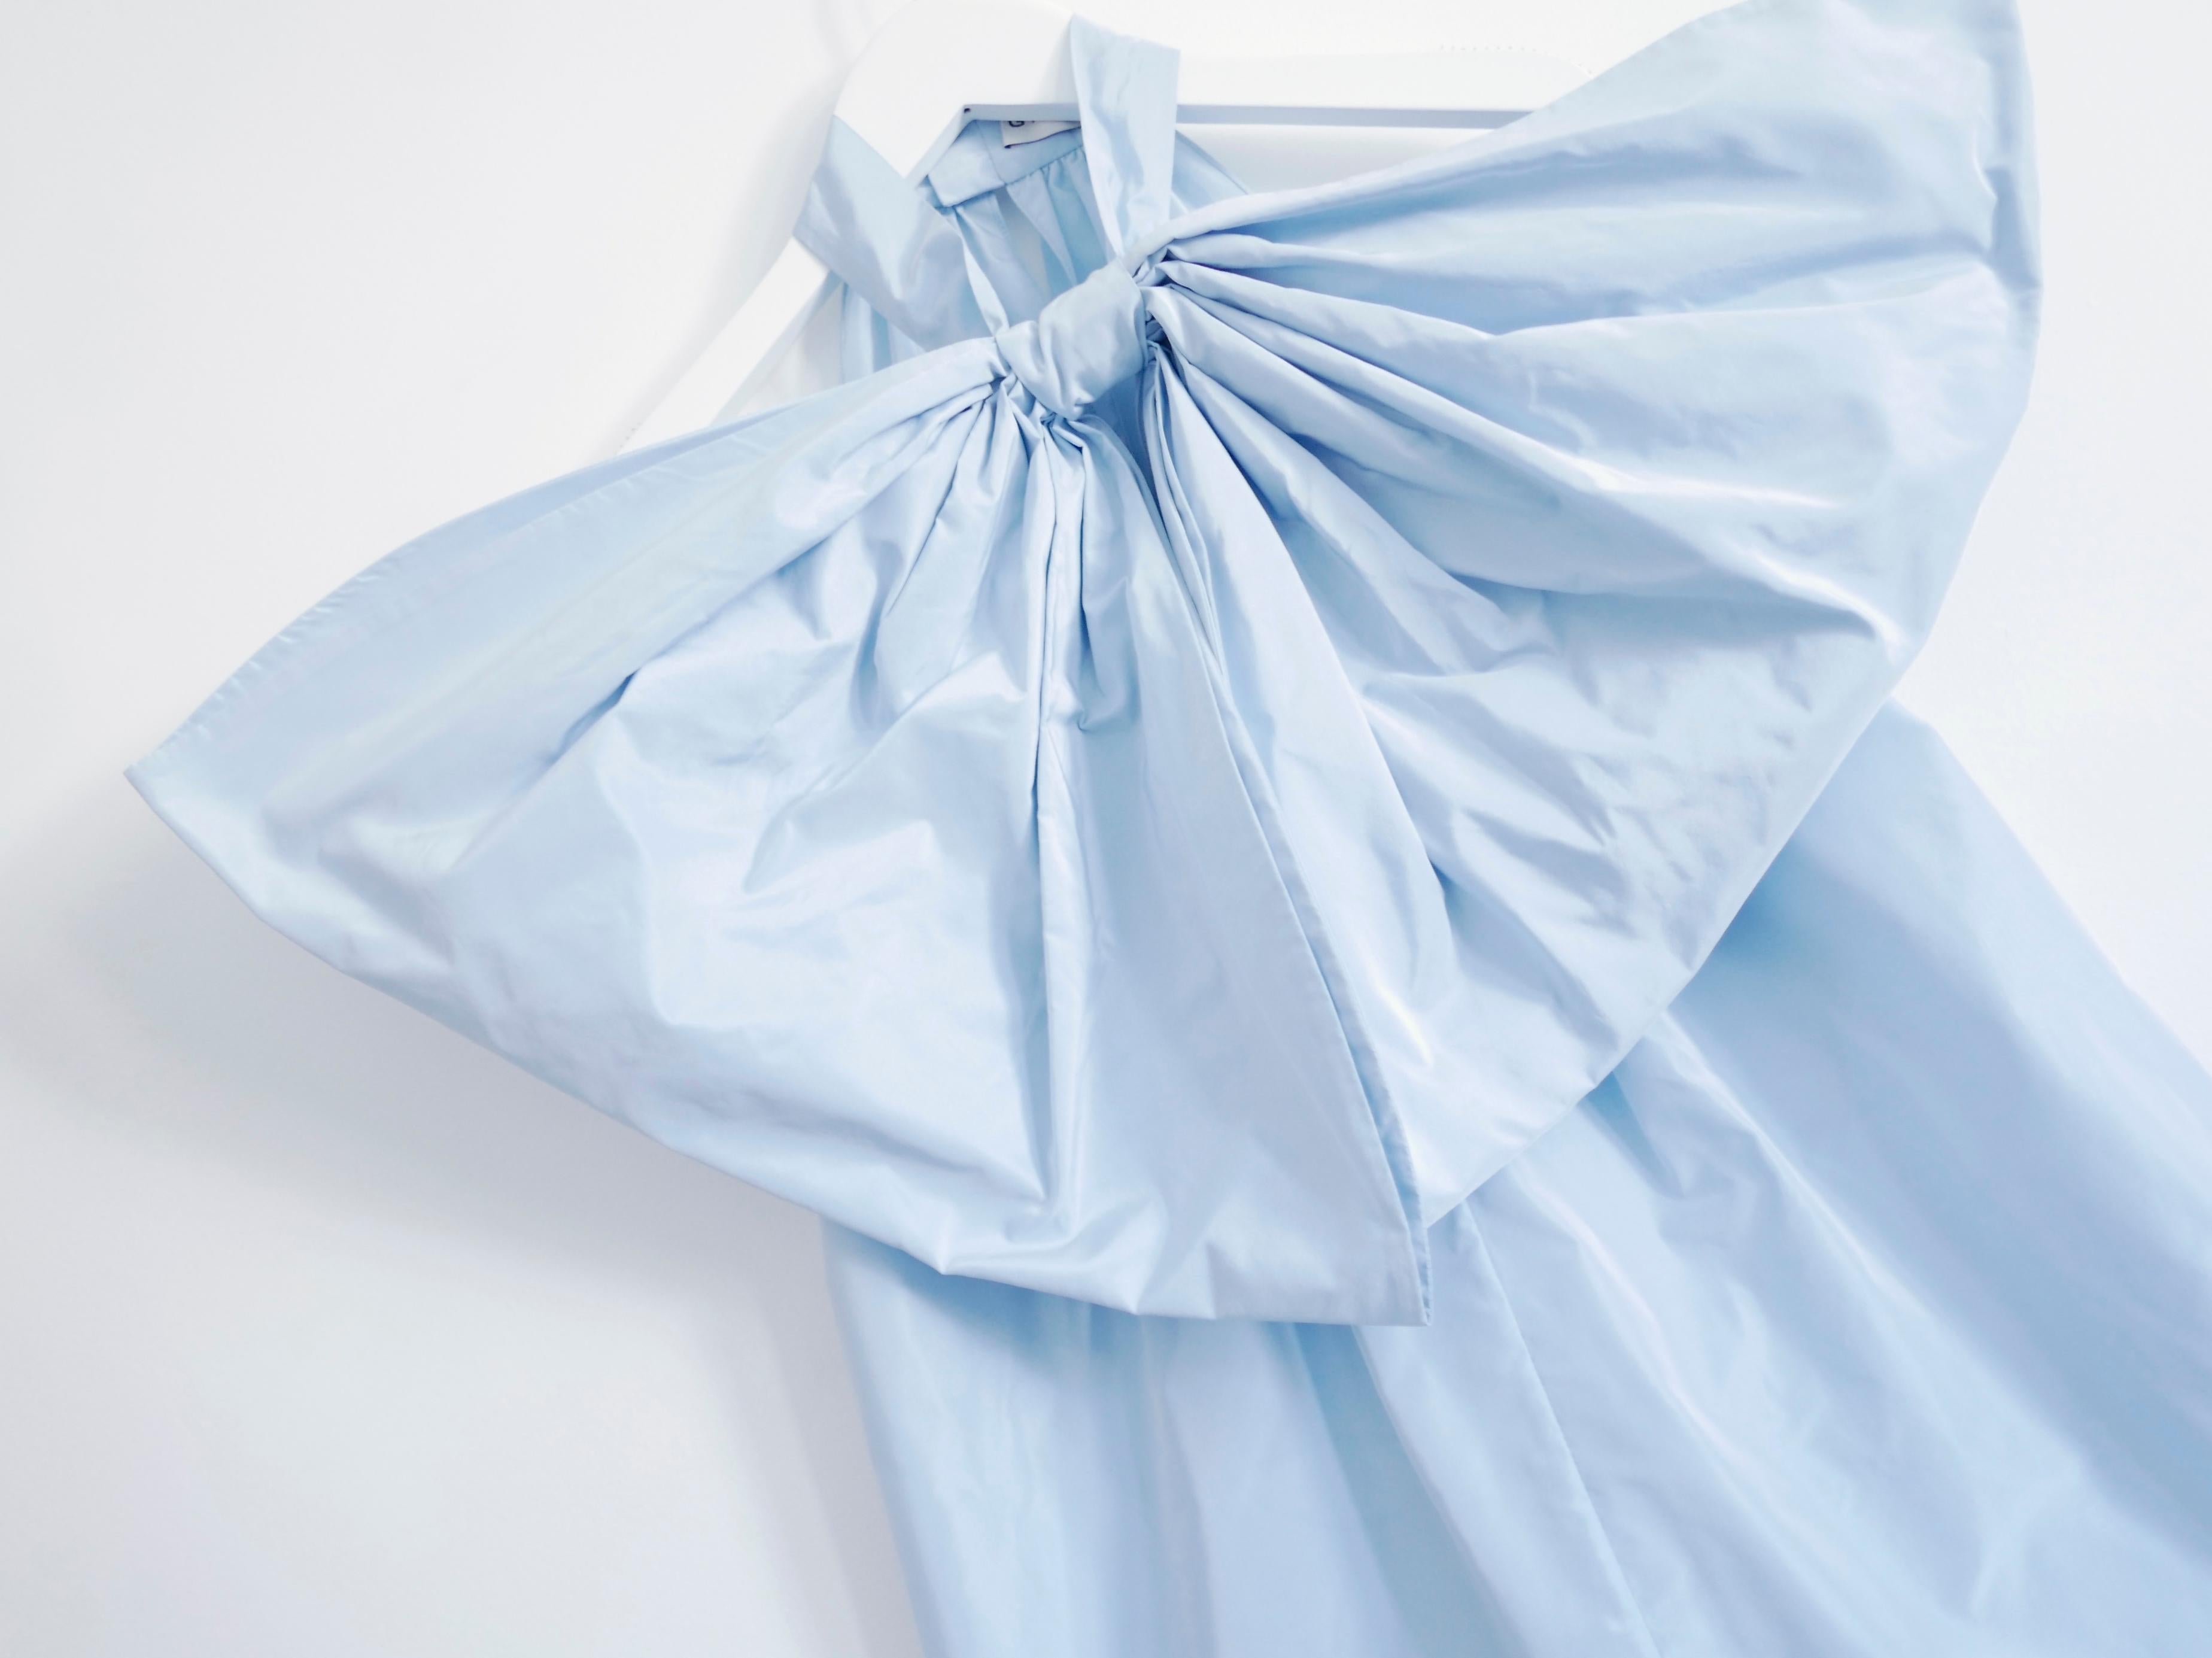 Stunning Givenchy pale blue exaggerated bow blouse. New with tag. Very Bella Baxter from Poor Things. Made from soft yet crisp cotton/polyester taffeta, it has a sleeveless cut with extra large bow tie at the neck and soft gathering at the back.